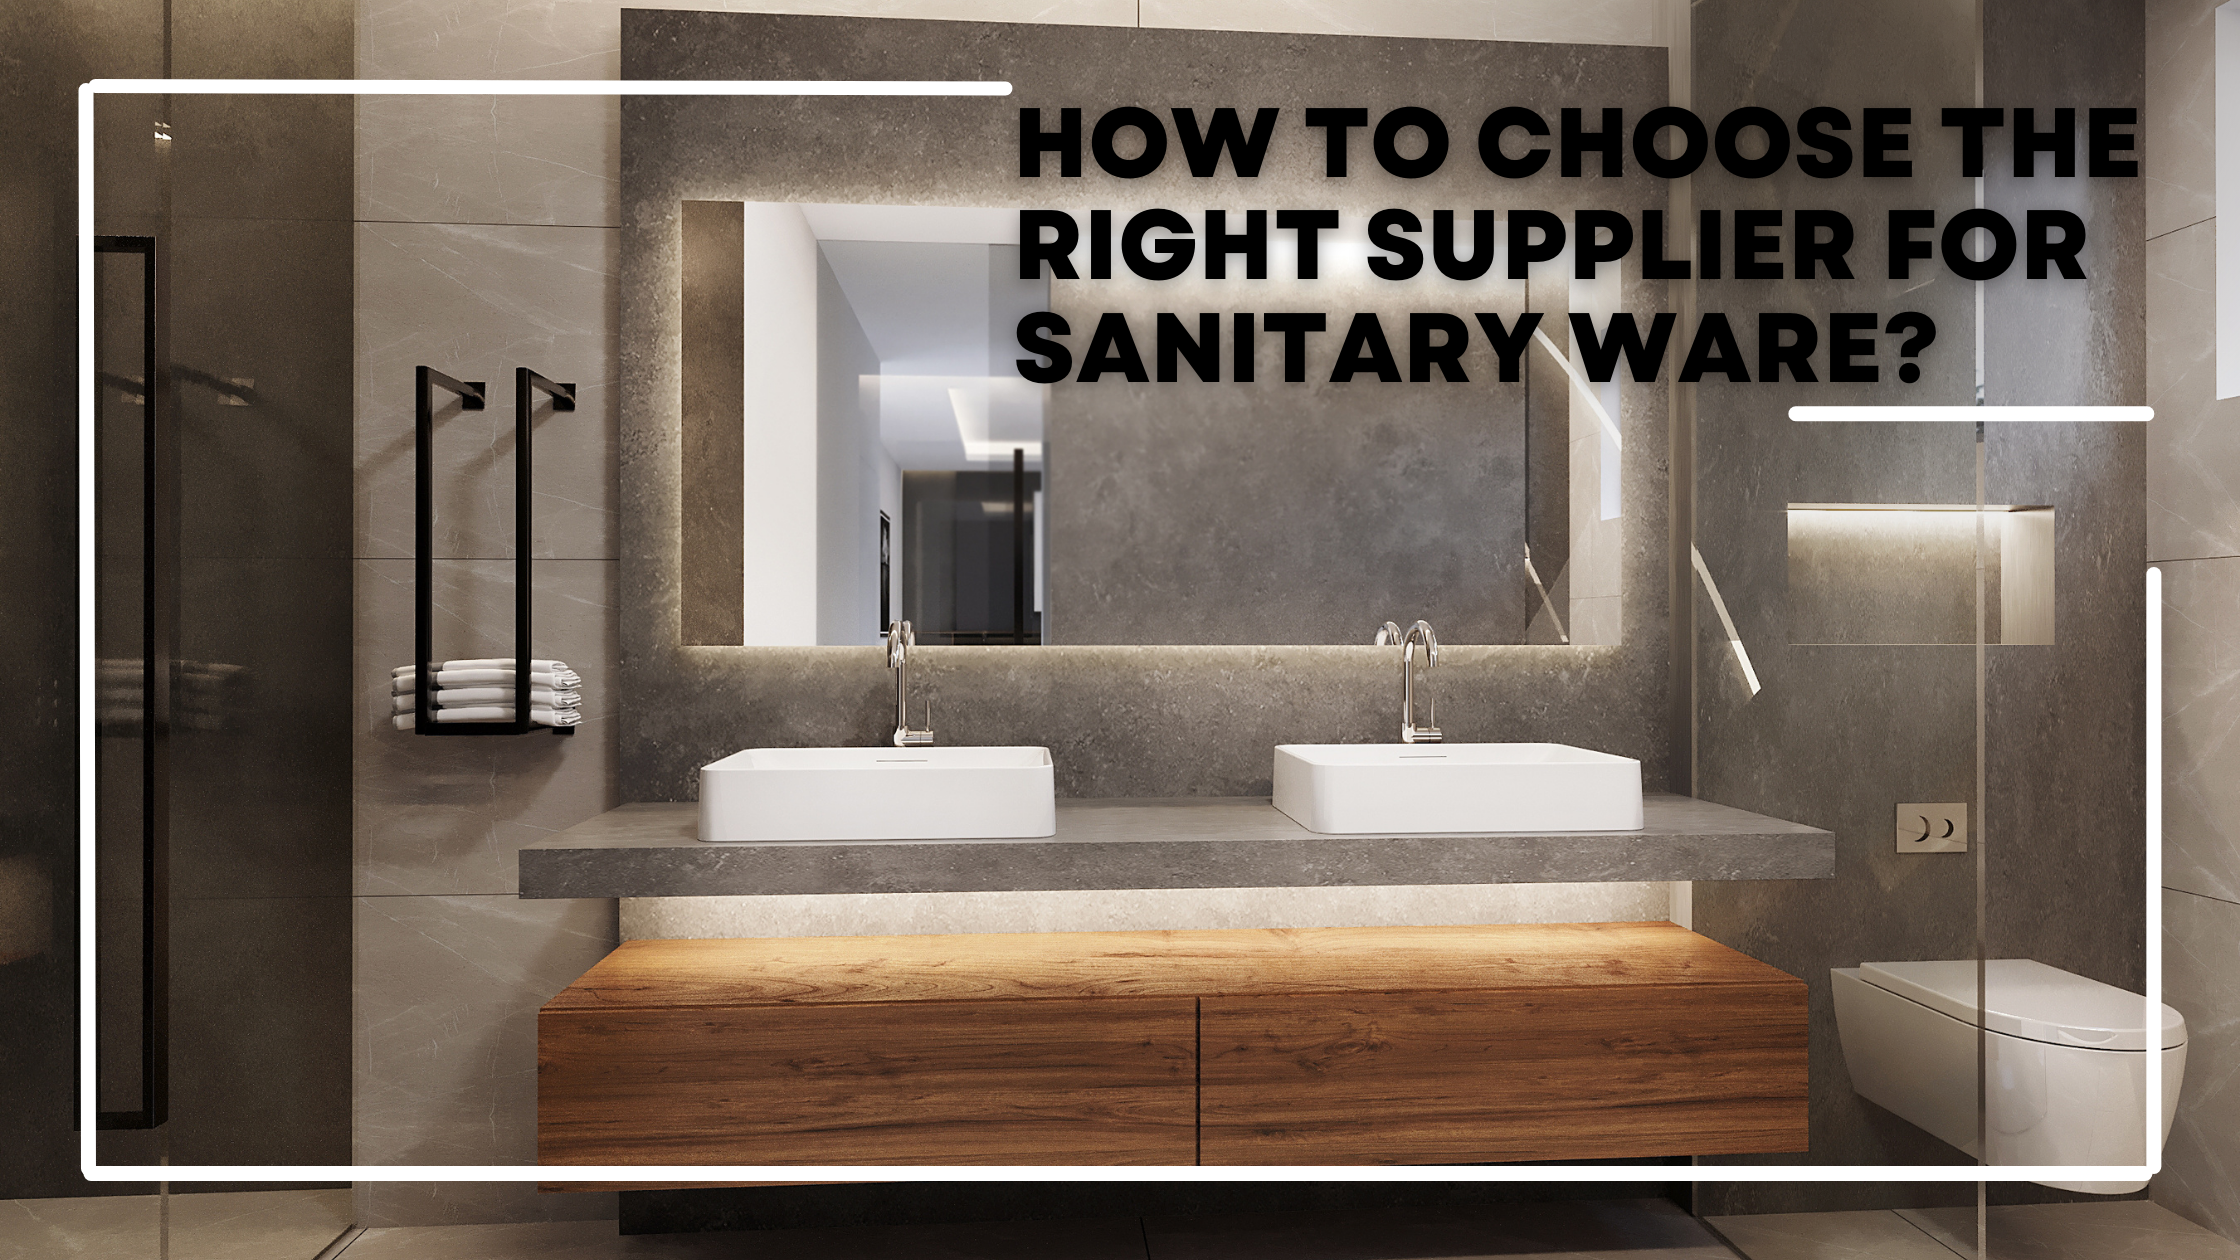 Right Supplier for Sanitary Ware